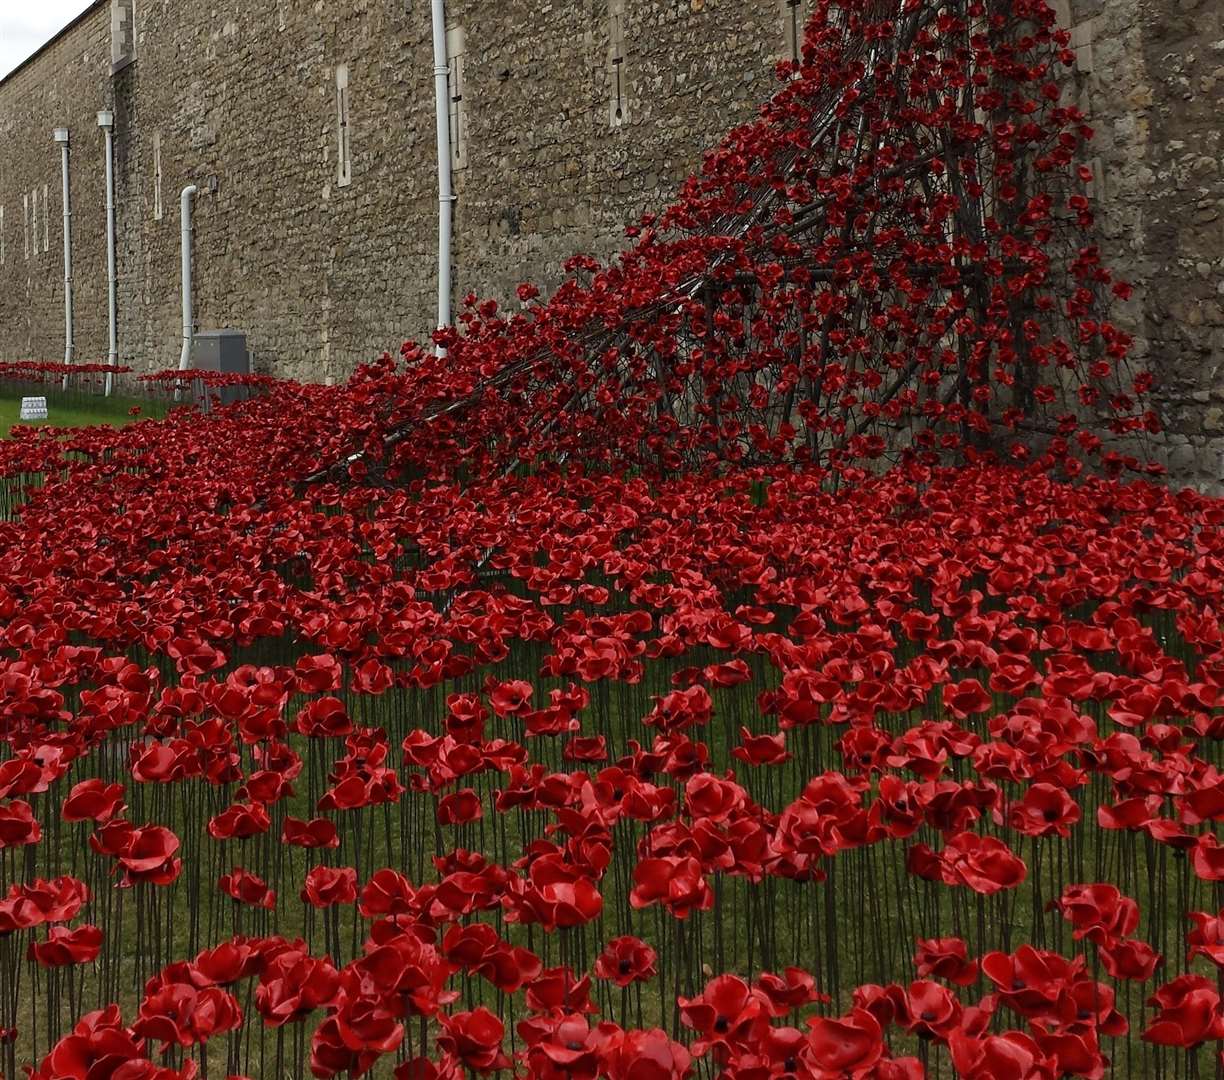 The poppy display at the Tower of London proved popular